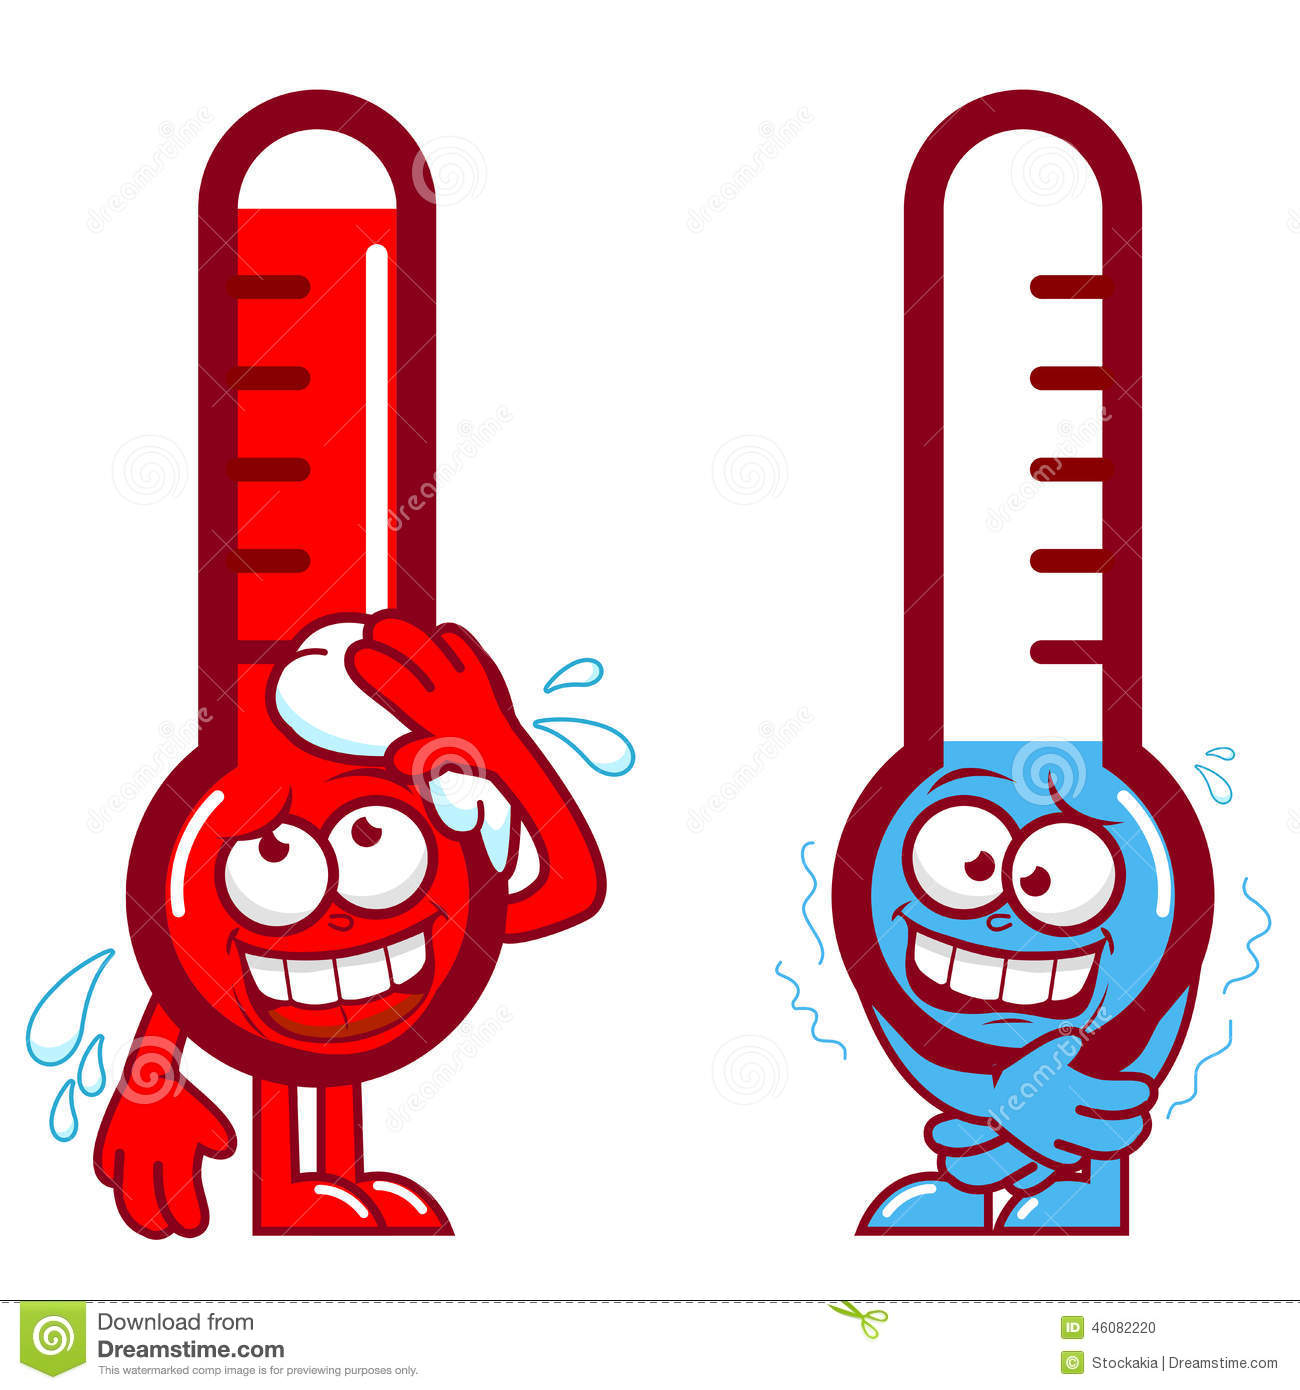 Funny Cartoon Thermometers Indicating Very Hot And Cold Temperature